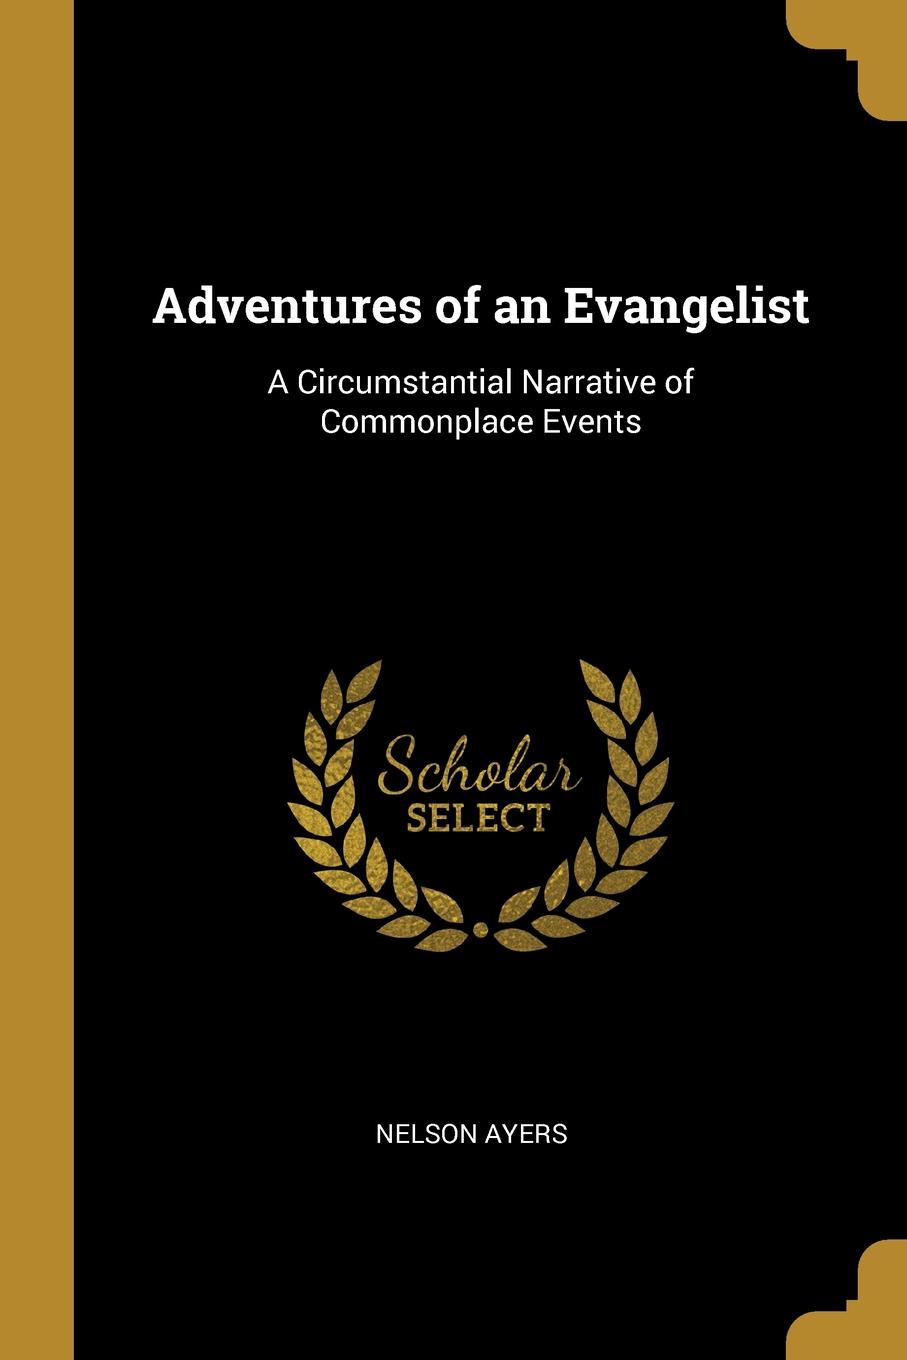 Adventures of an Evangelist. A Circumstantial Narrative of Commonplace Events